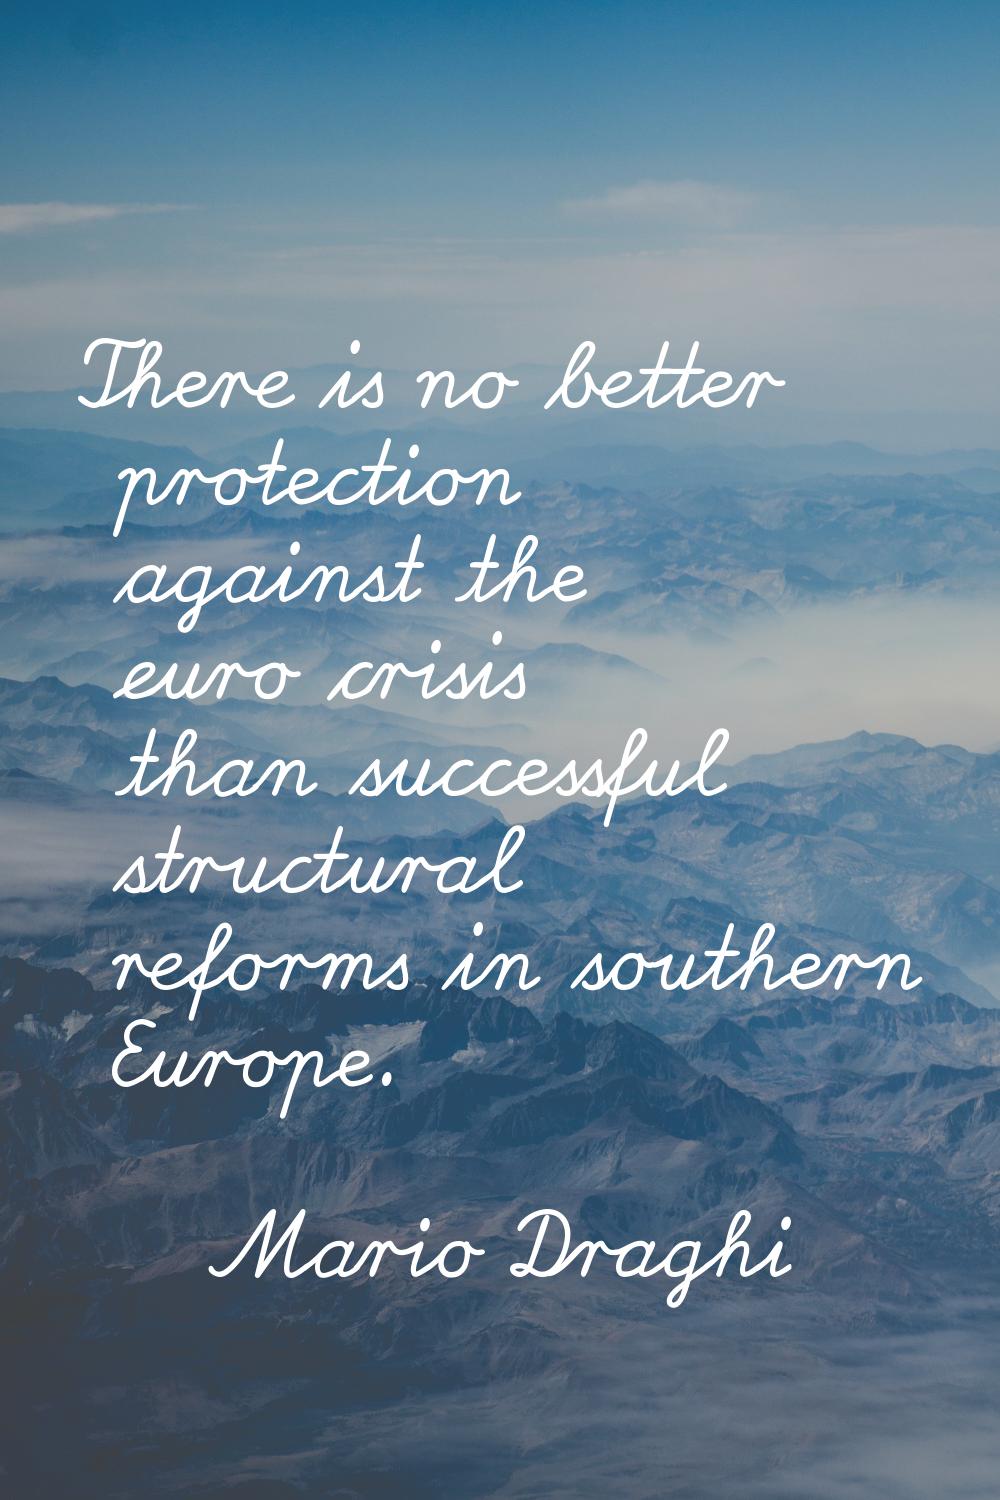 There is no better protection against the euro crisis than successful structural reforms in souther